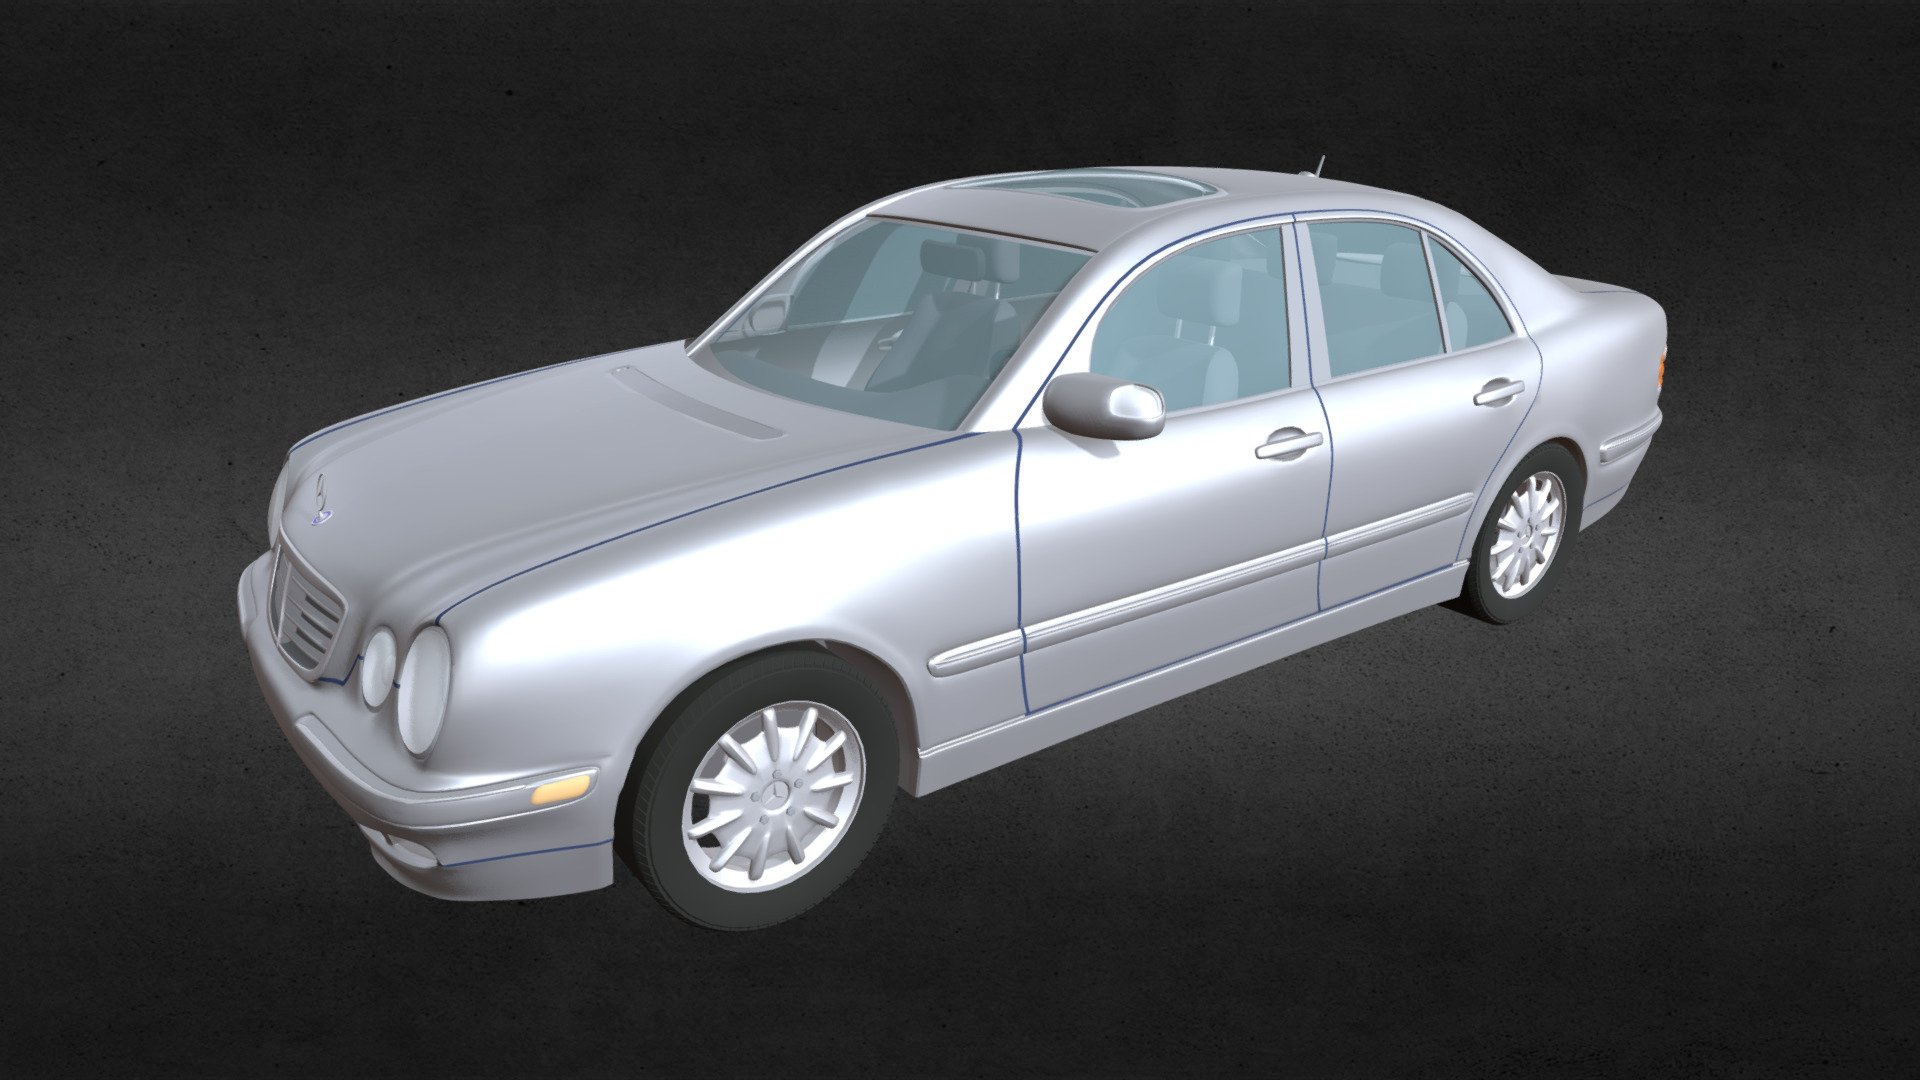 The Mercedes-Benz E-Class is a range of executive cars manufactured by German automaker Mercedes-Benz in various engine and body configurations. 
This digital model is based on the 2000 version of the Mercedes Benz E320.




Approx 166594 polygons.

Made entirely with 3 point polygons.

Digitally scanned from the actual car.

Has a basic cabin which can be seen through the windows.

However, the doors are not separate parts and can not be opened.

Includes group information for all 4 wheels which your software should interpret as separate parts.

Although the model includes these parts, this version of the model is not rigged.

Includes logically named materials, such as BodyMetal, Tires, Headlight Glass, and more. This makes it very easy to recolor the model.

This version includes an mtl file, which your software program should read to colorize the model.

The model has basic UV mapping and NO textures are included.

Model by Digimation and uploaded for sale here with permission 3d model